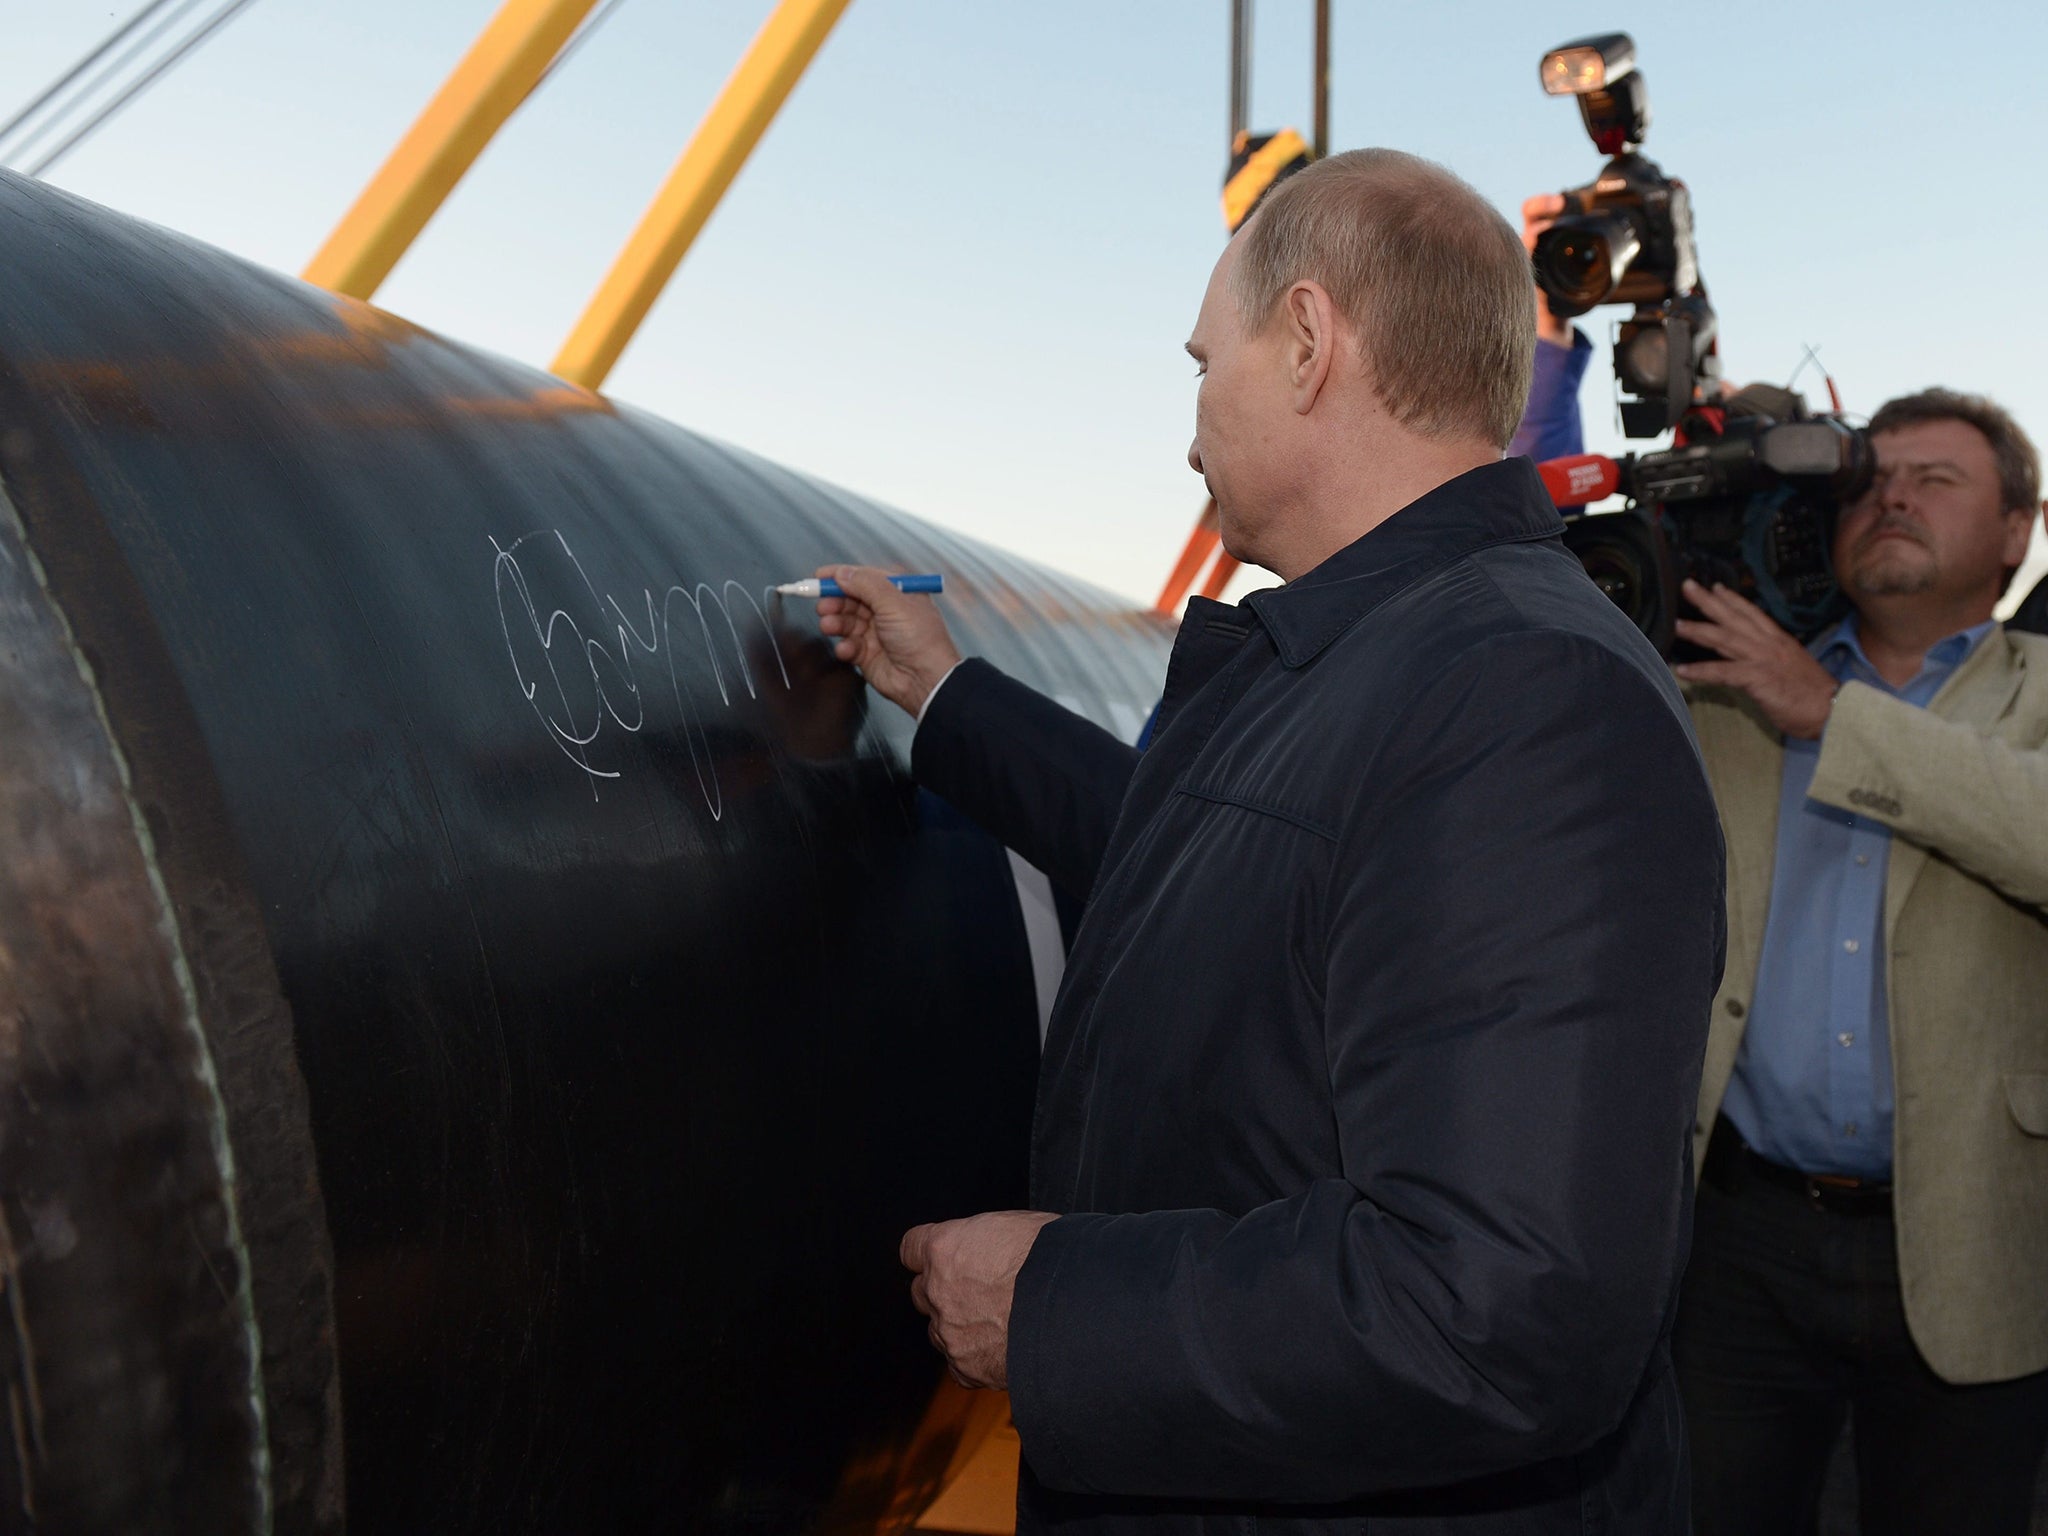 Russian President Vladimir Putin leaves his signature on the symbolicaly joined pipes at the ceremony marking the joining of the first link in the Power of Siberia main gas pipeline